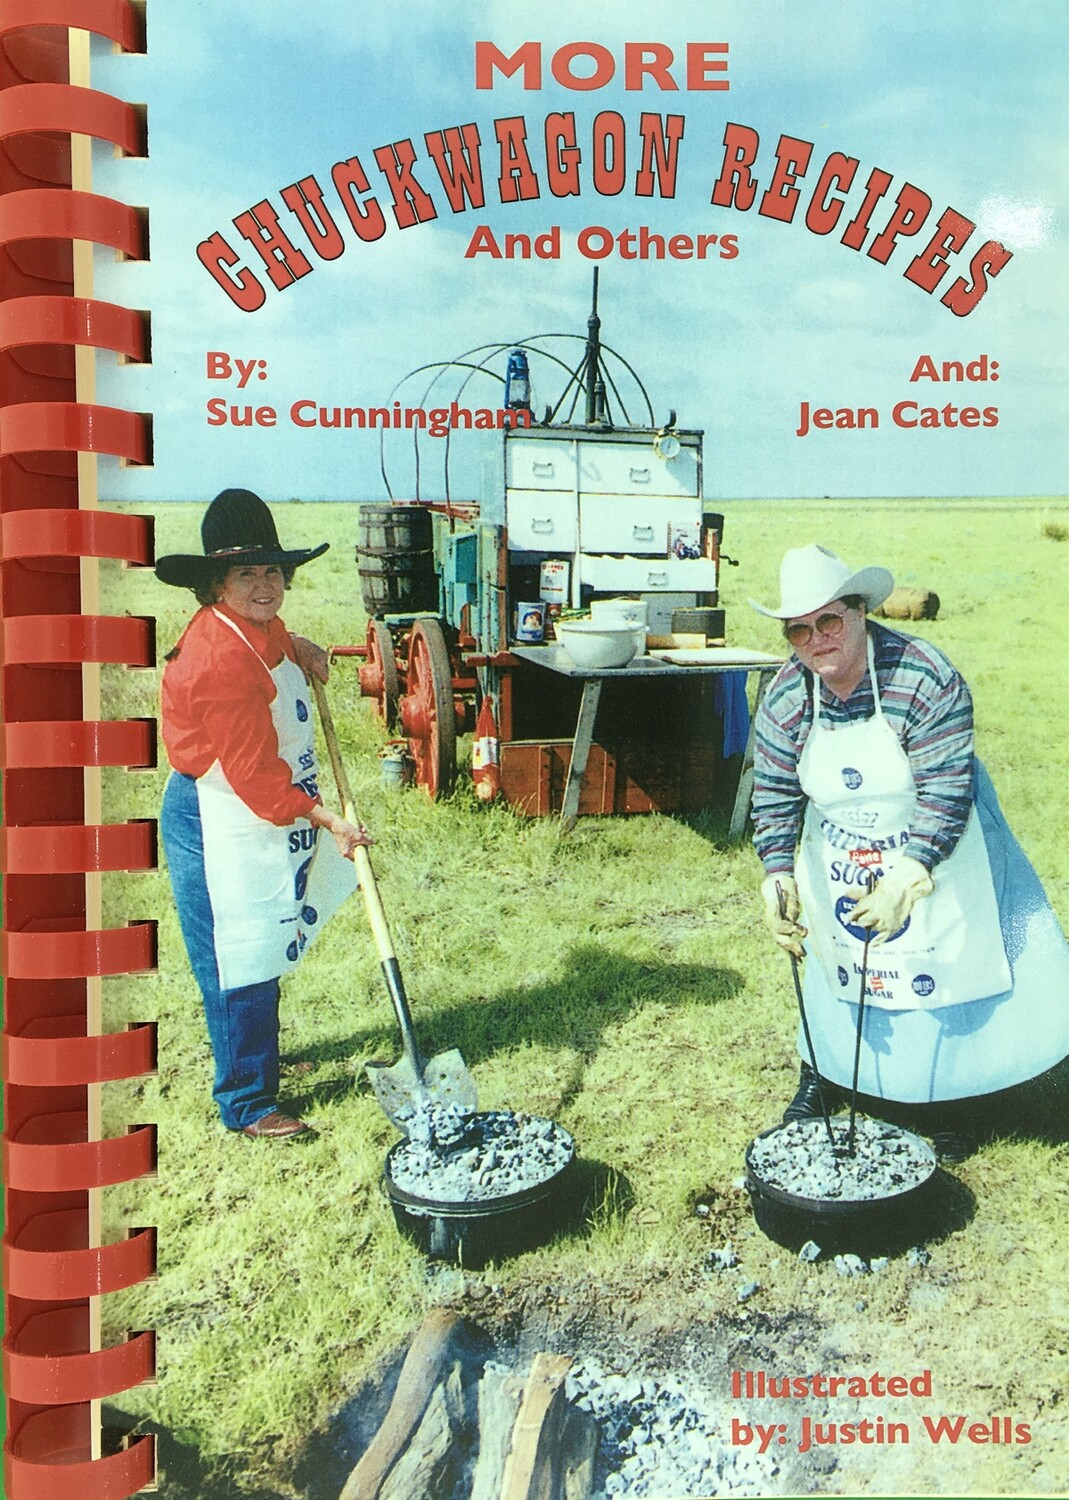 More Chuckwagon Recipes & Others